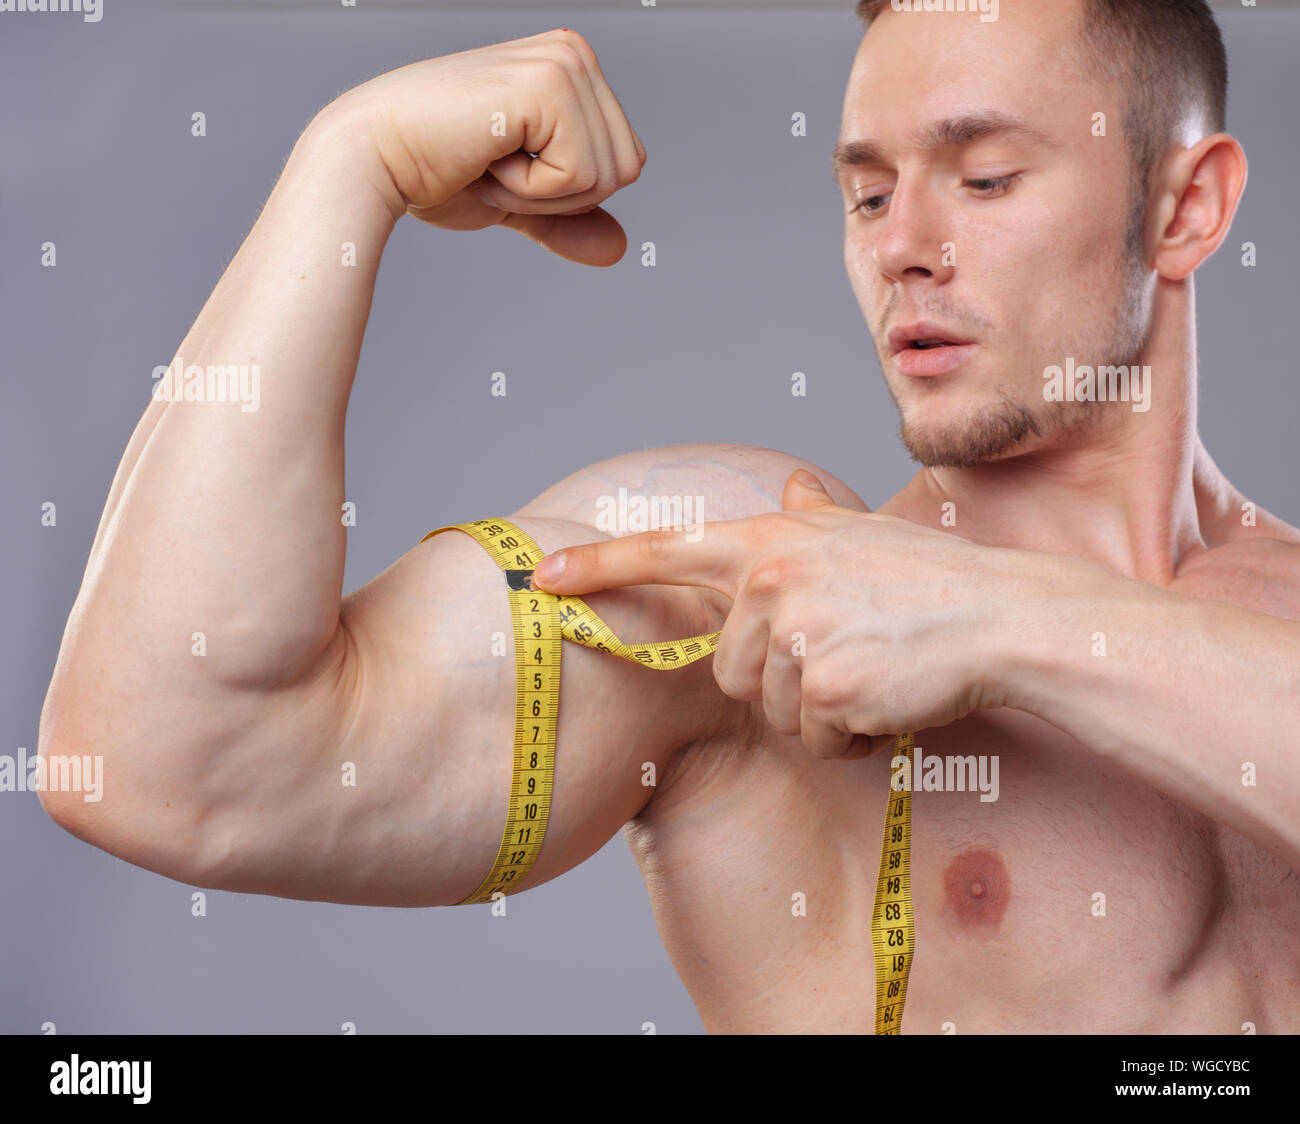 https://c8.alamy.com/comp/WGCYBC/image-of-muscular-man-measure-his-biceps-with-measuring-tape-in-centimeters-WGCYBC.jpg